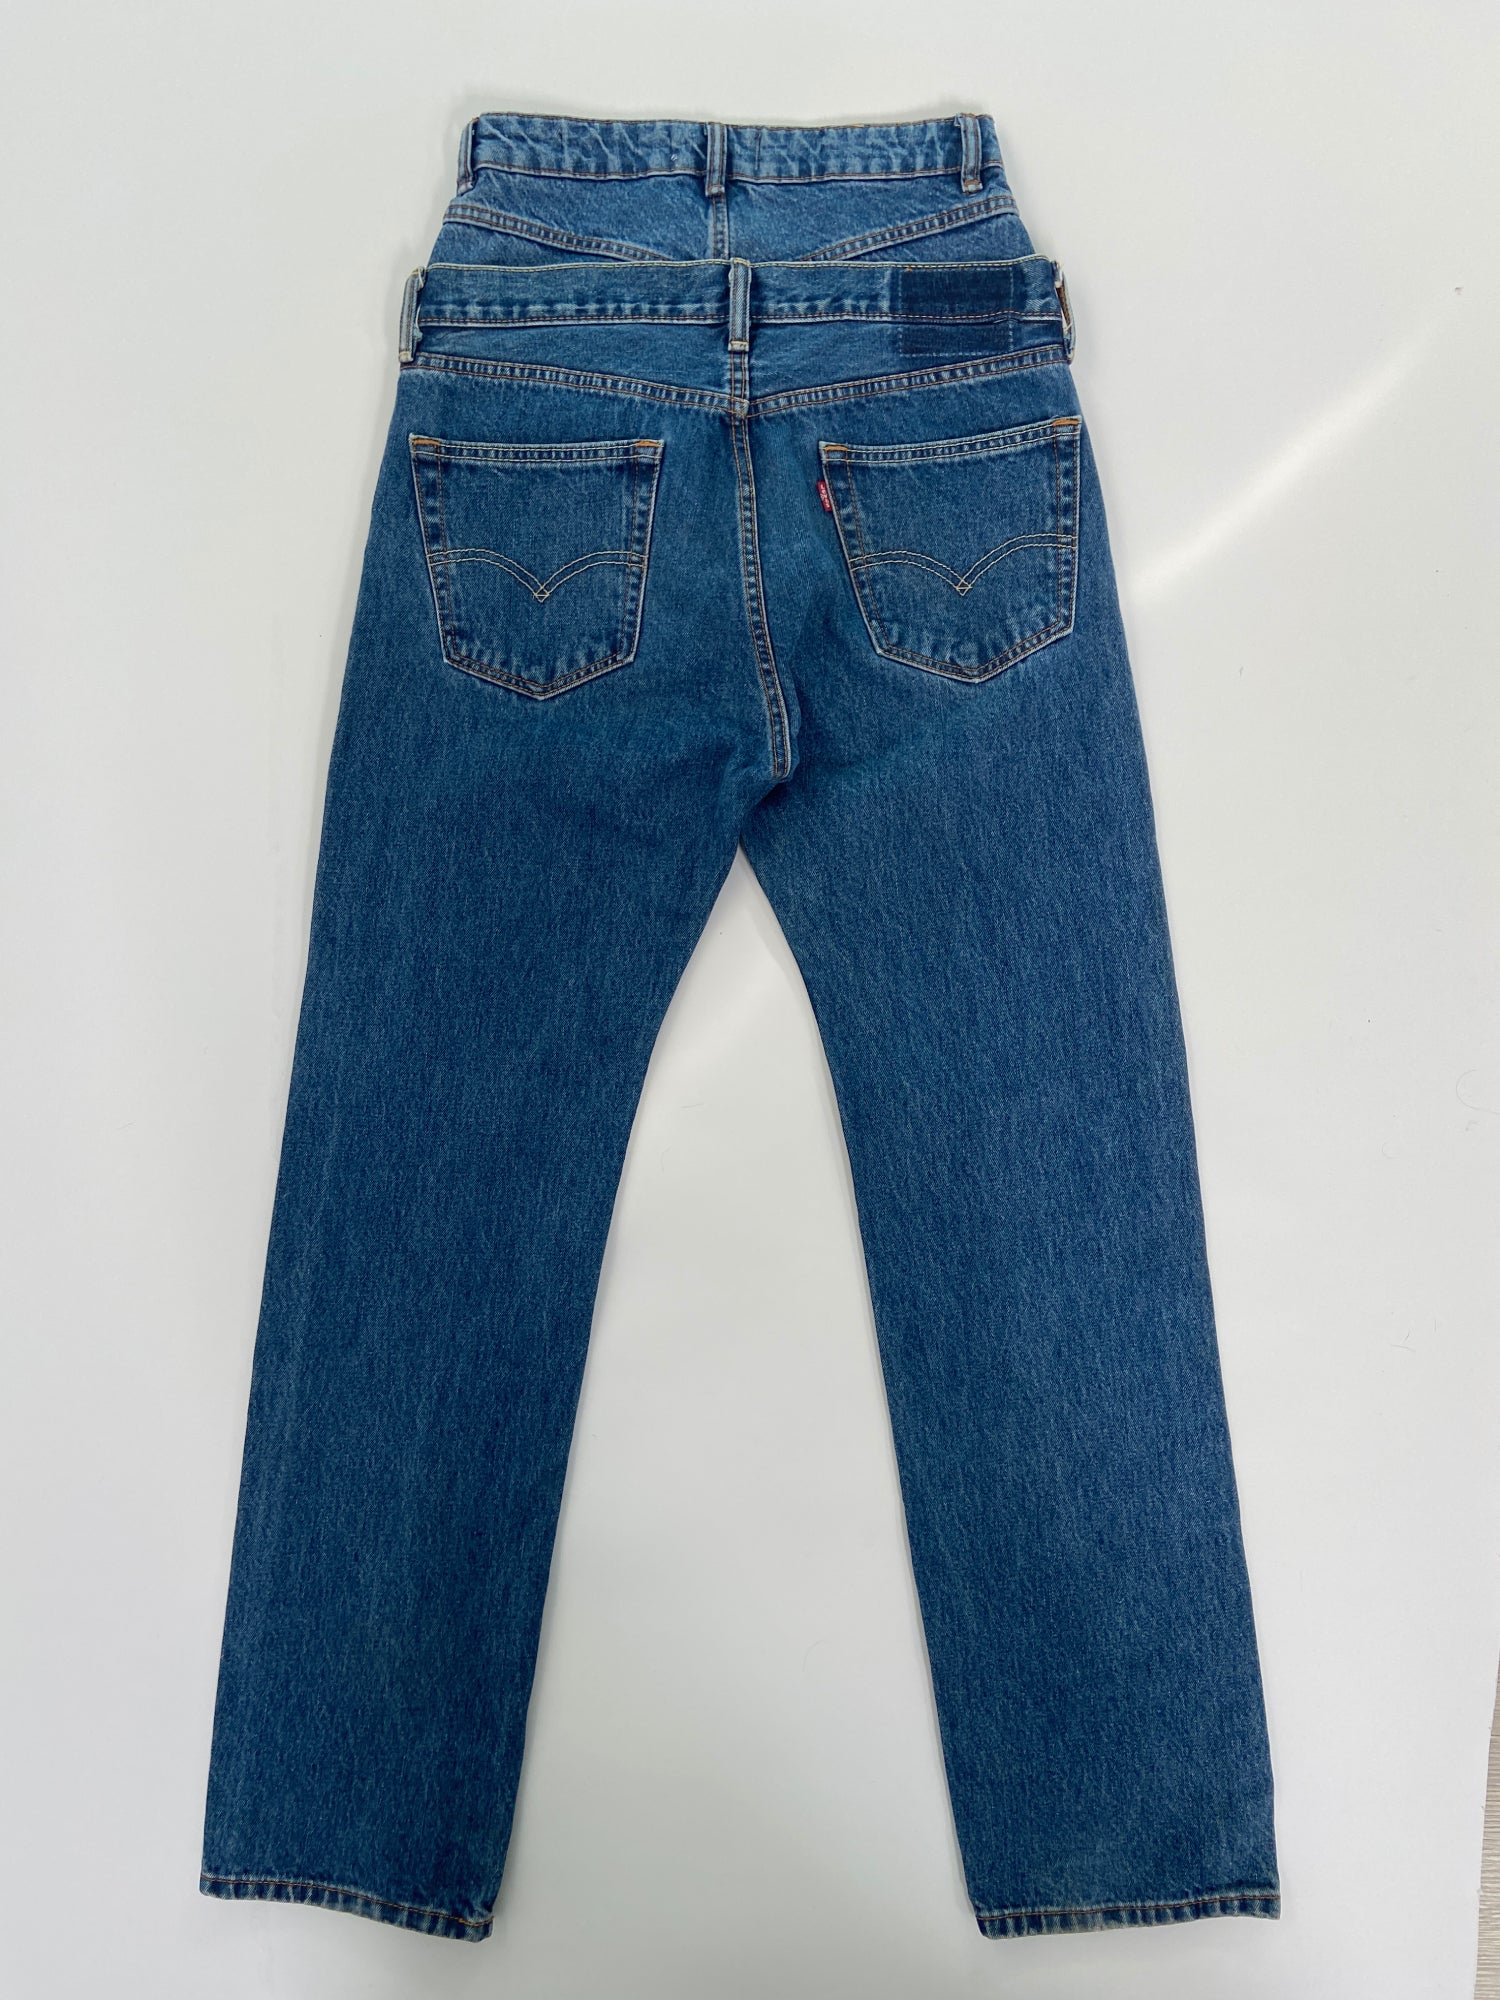 2IN1 JEANS - SIZE S-M